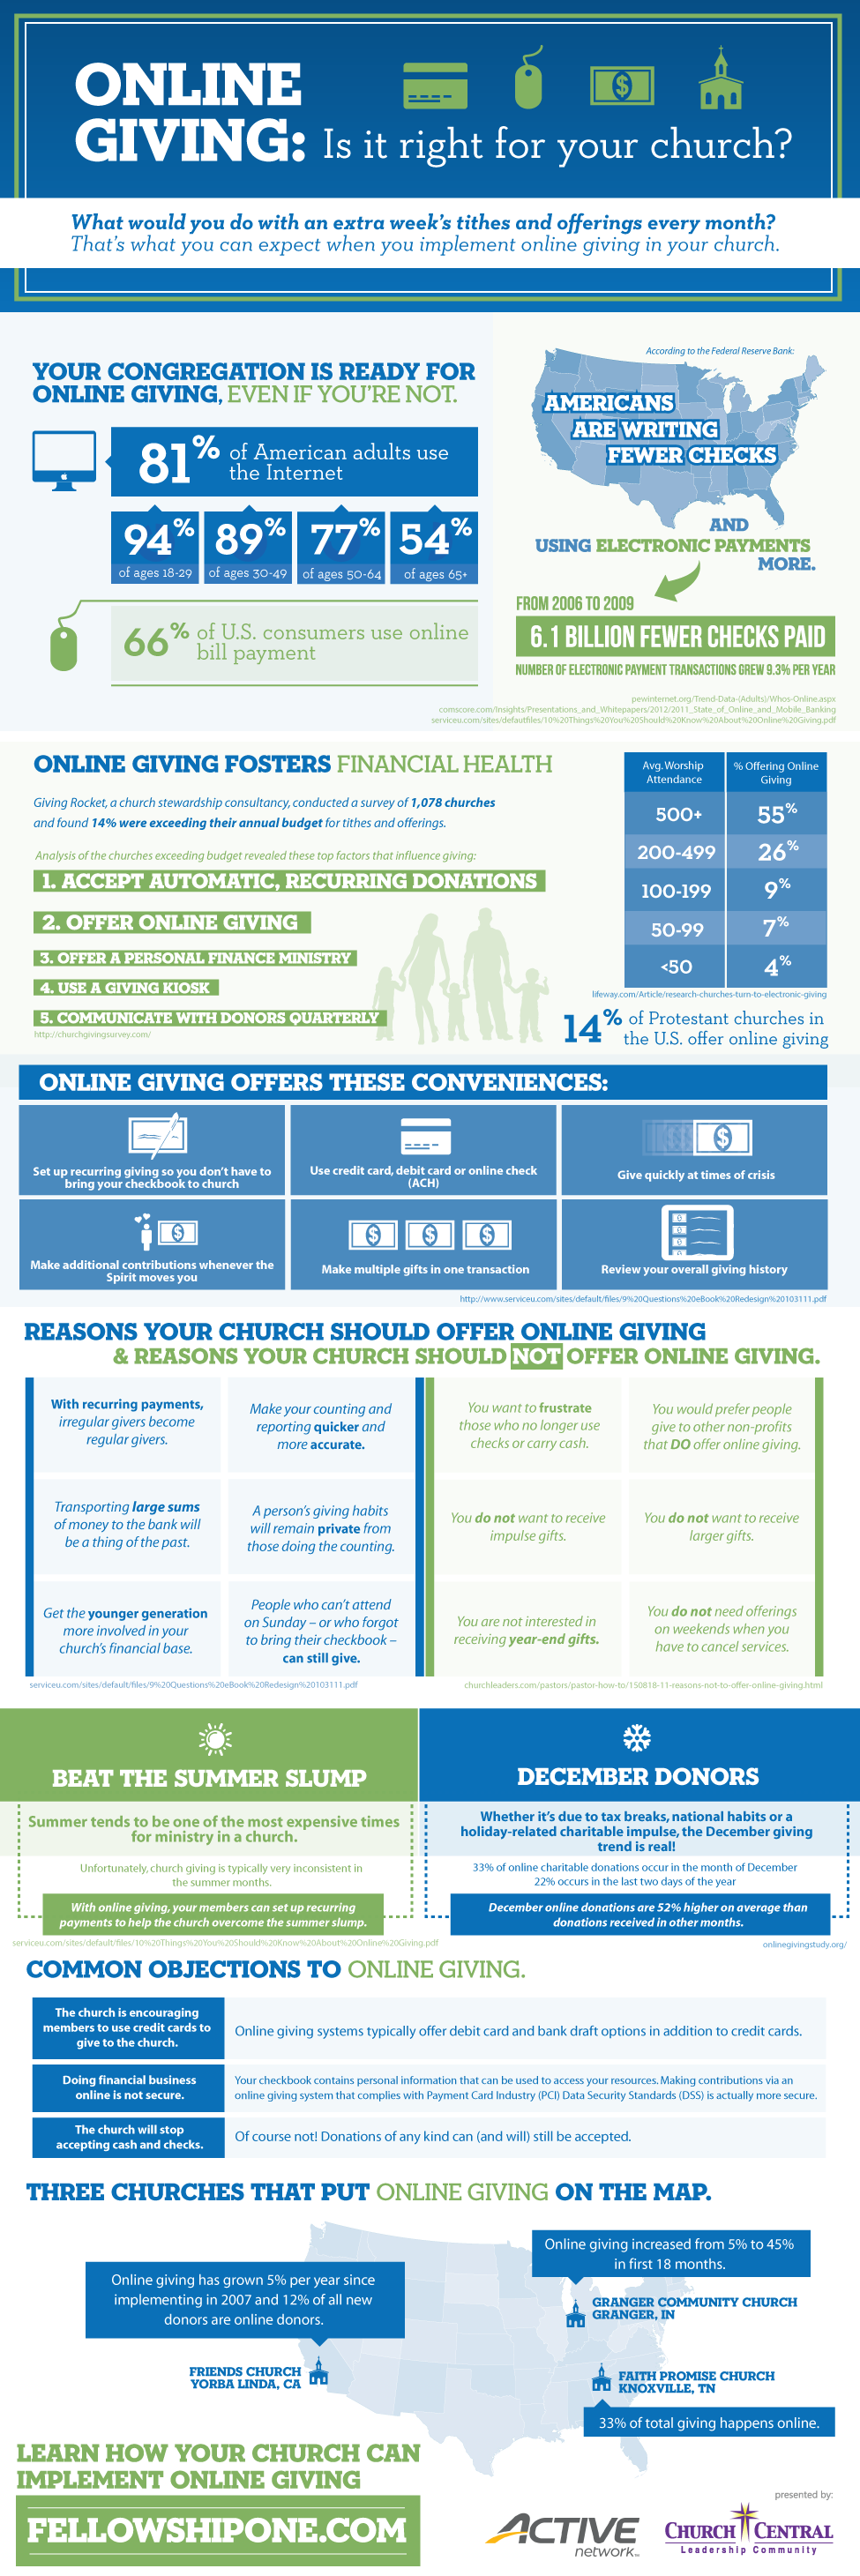 Online Giving: Is it right for your church? [Infographic]